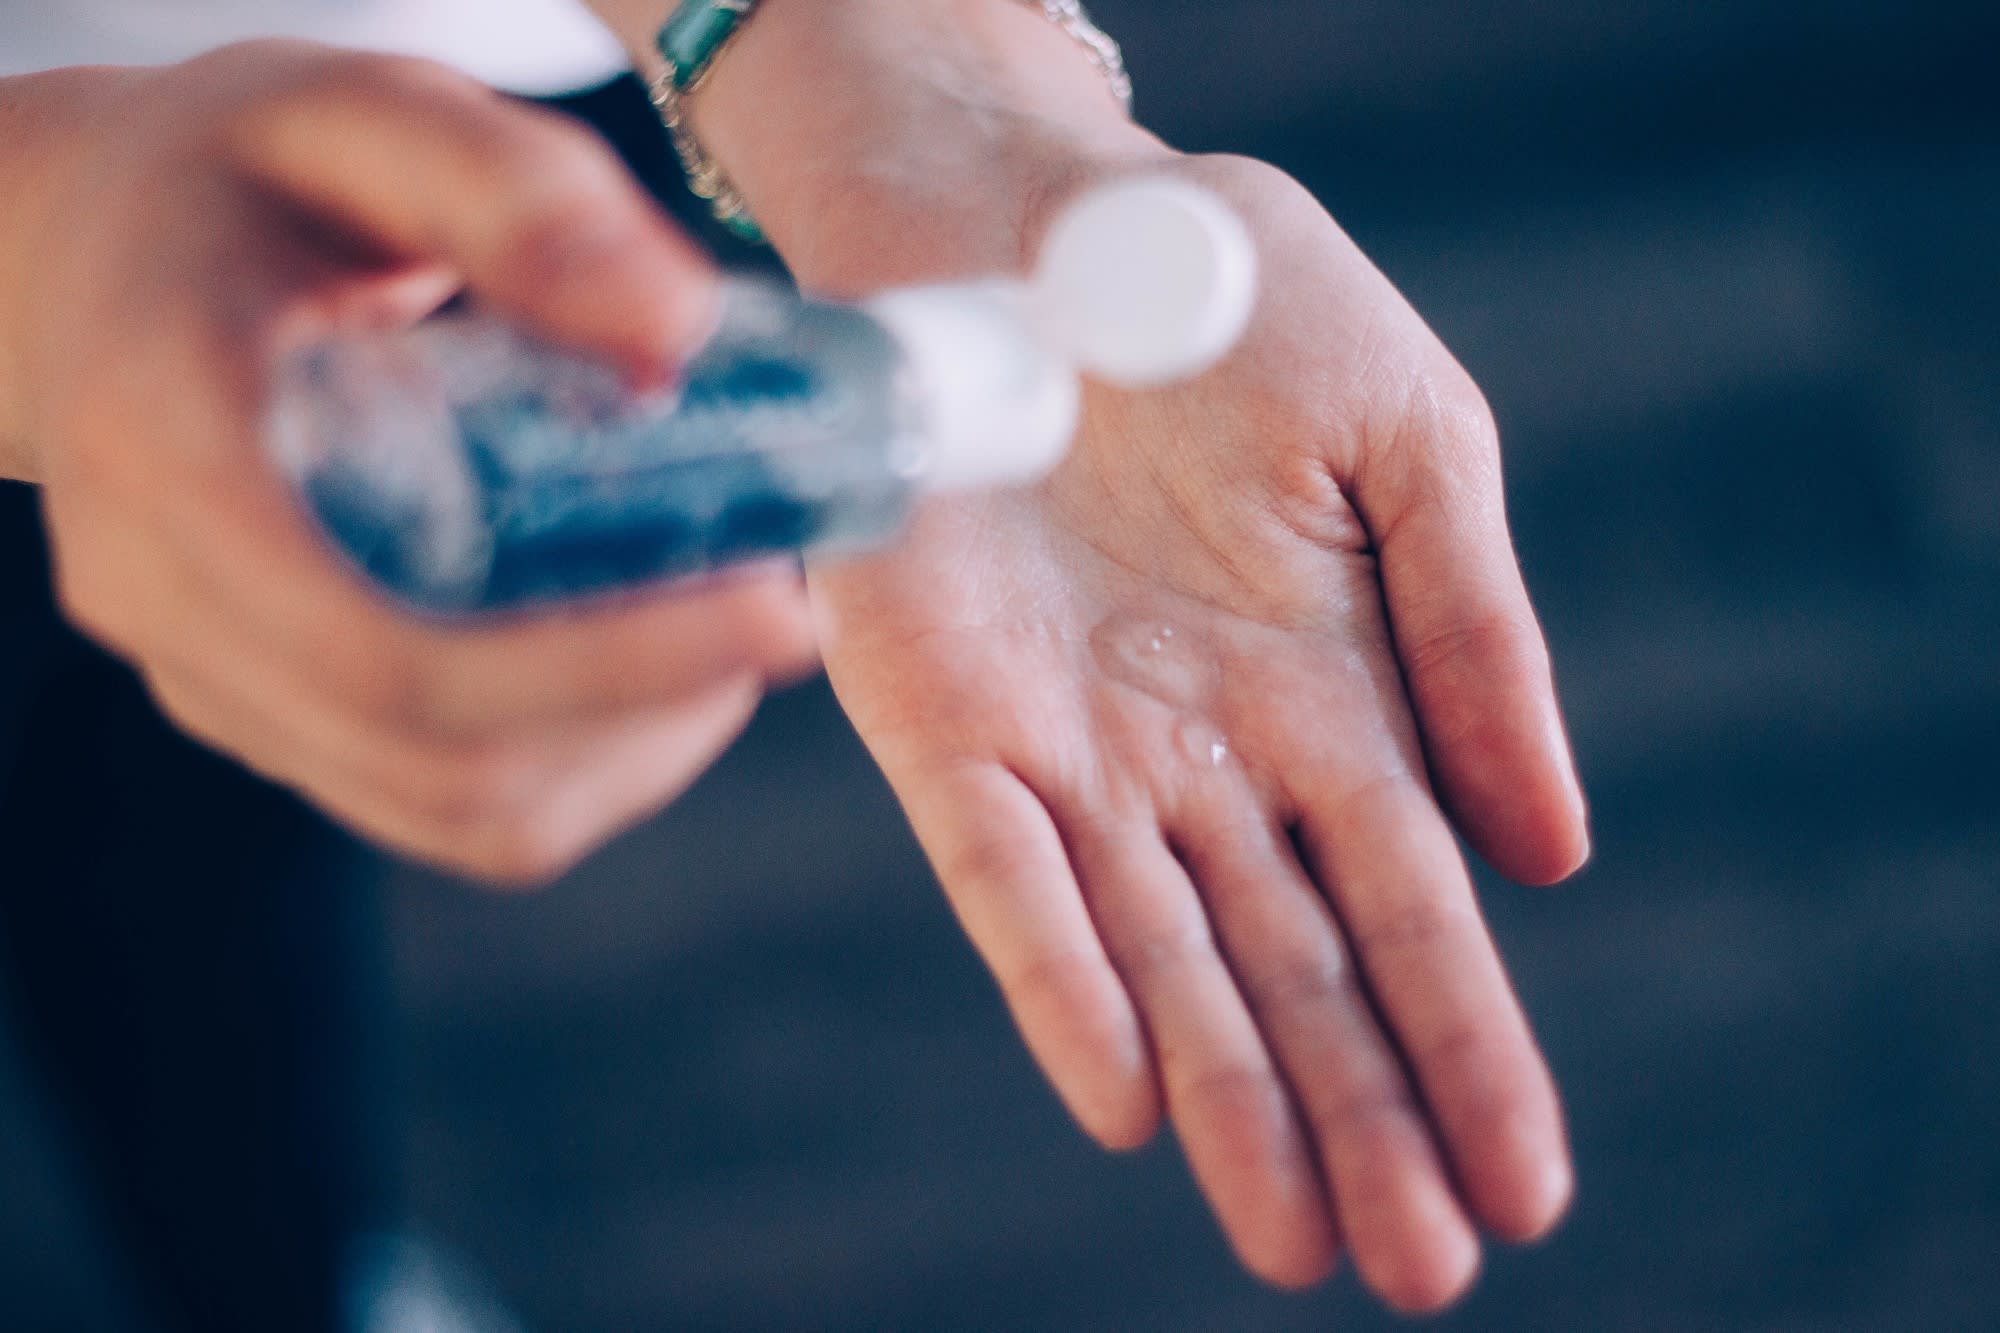 Hand sanitizer prices surge to $50 a bottle — here's how to make it at home for under $2